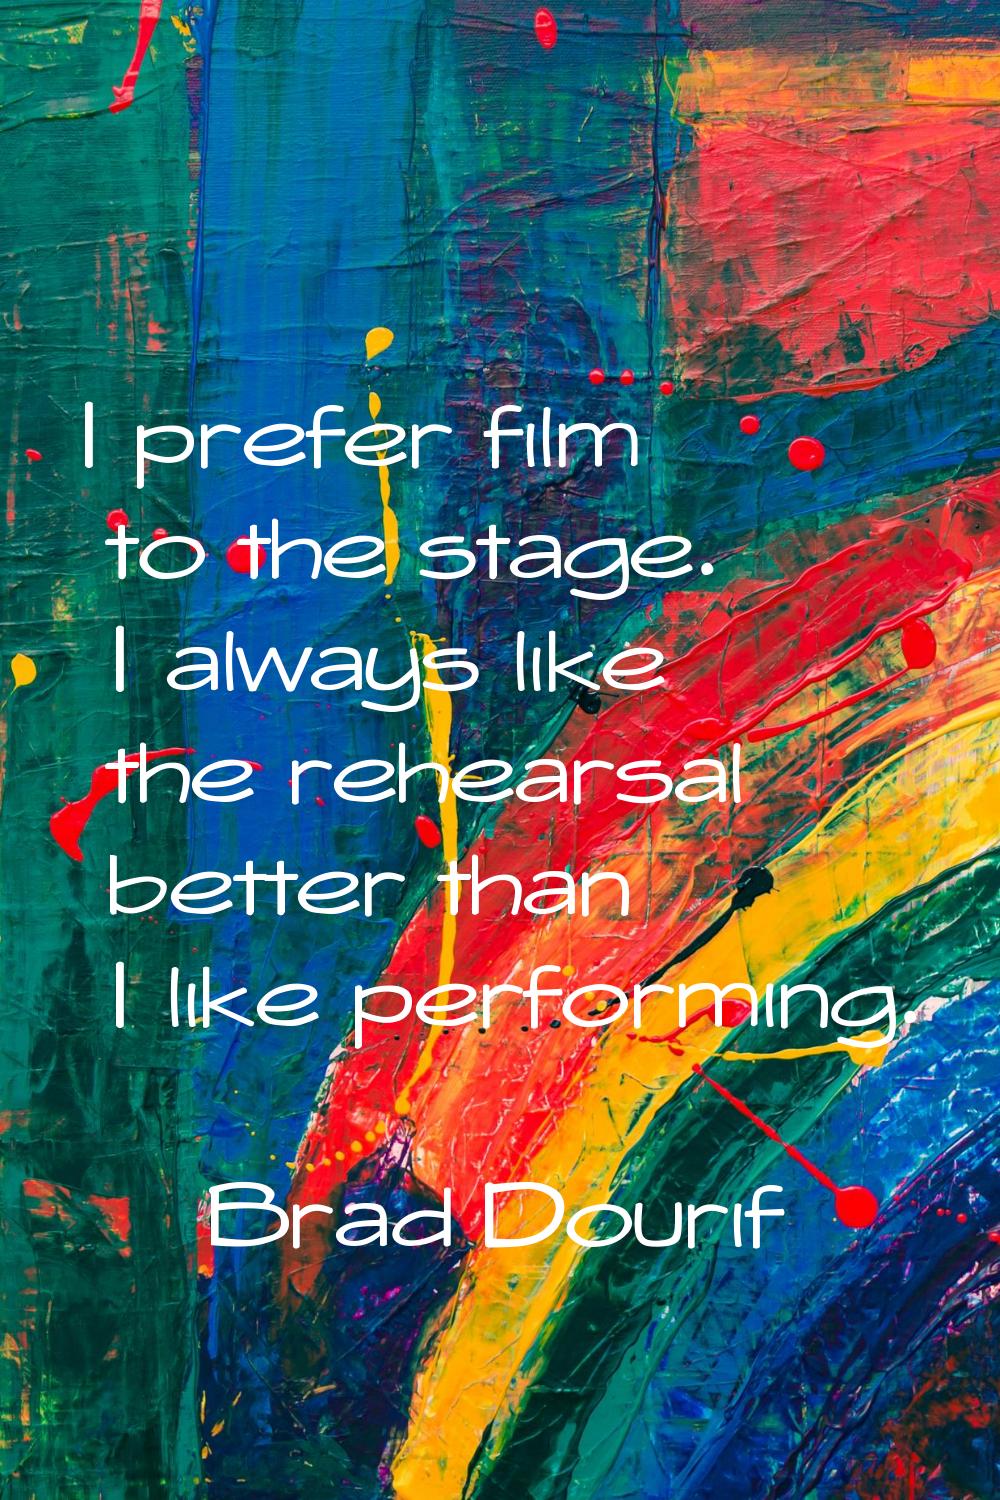 I prefer film to the stage. I always like the rehearsal better than I like performing.